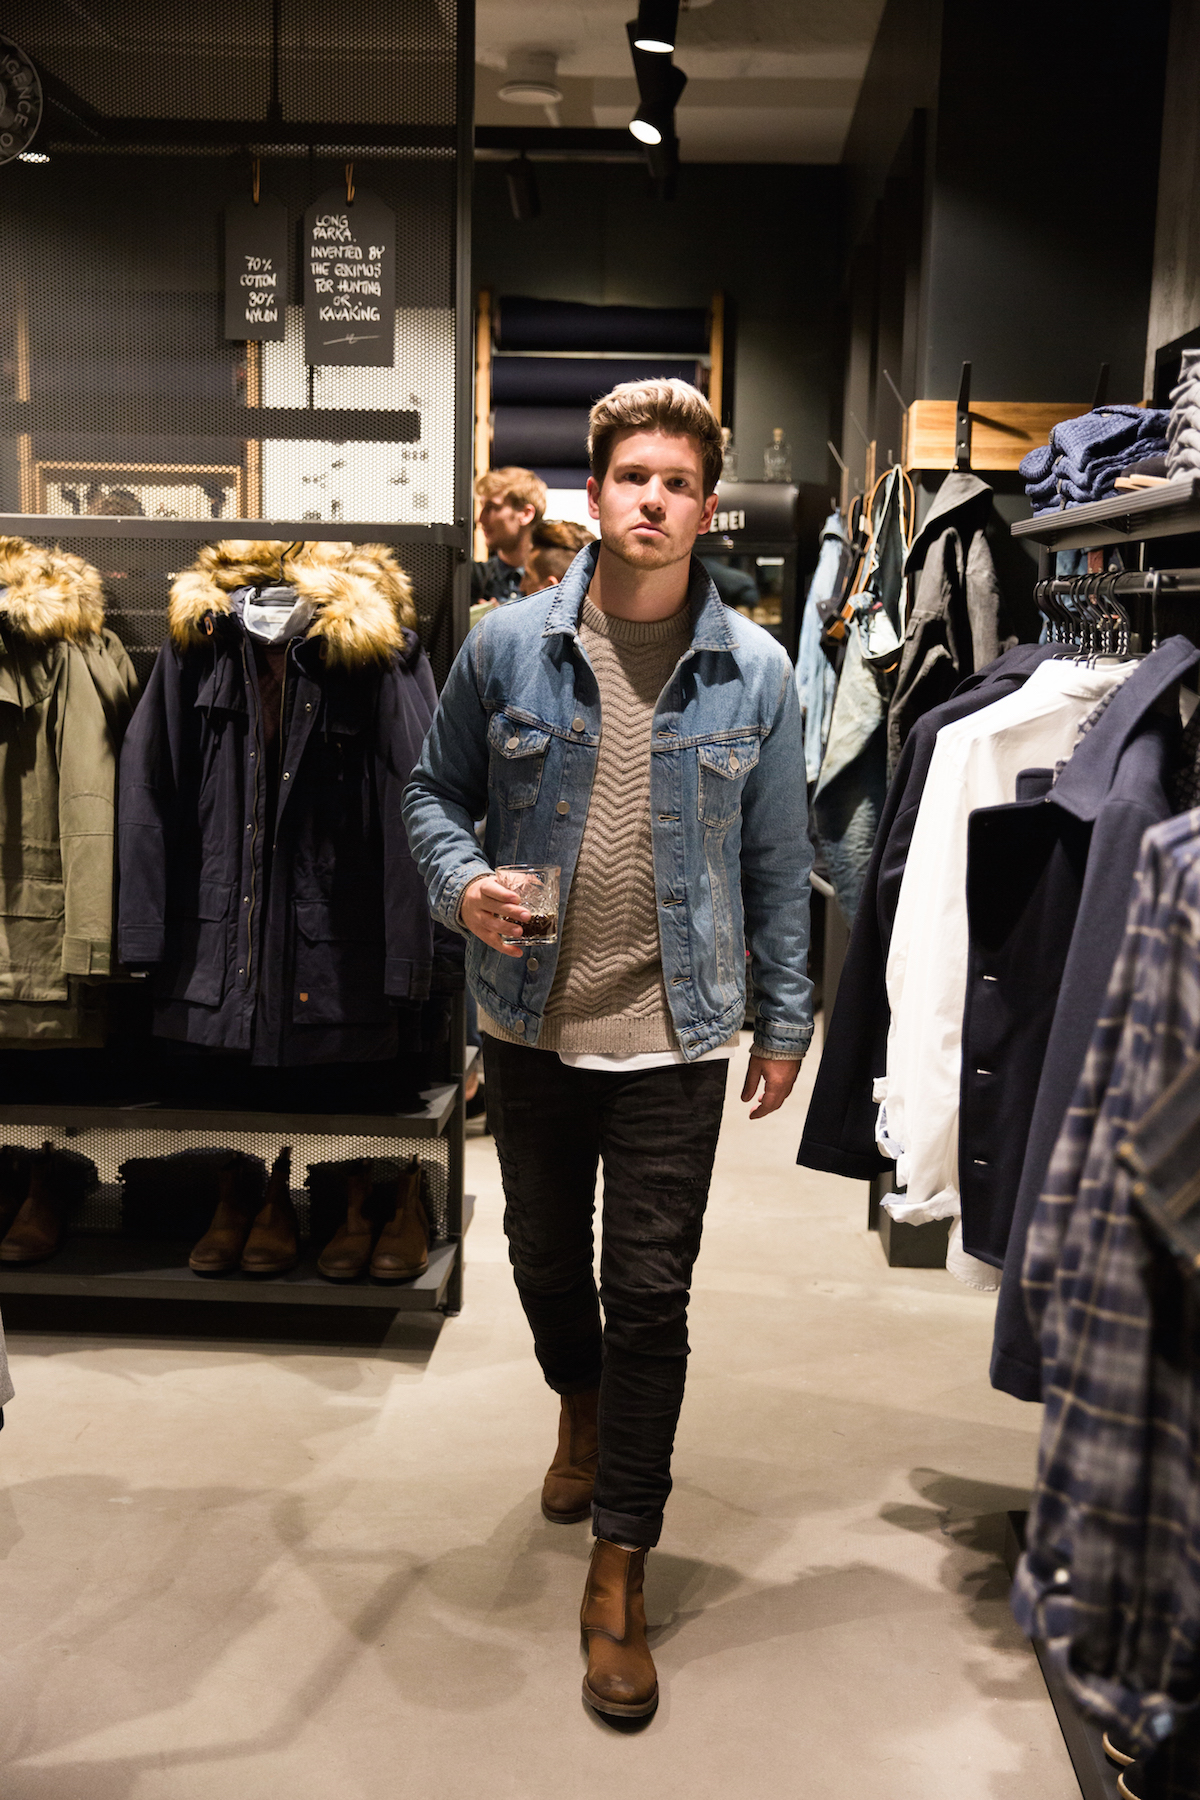 jack-and-jones-jeans-intelligence-studio-salzburg-opening_meanwhile-in-awesometown_austrian-mens-fashion-and-lifestyleblog14